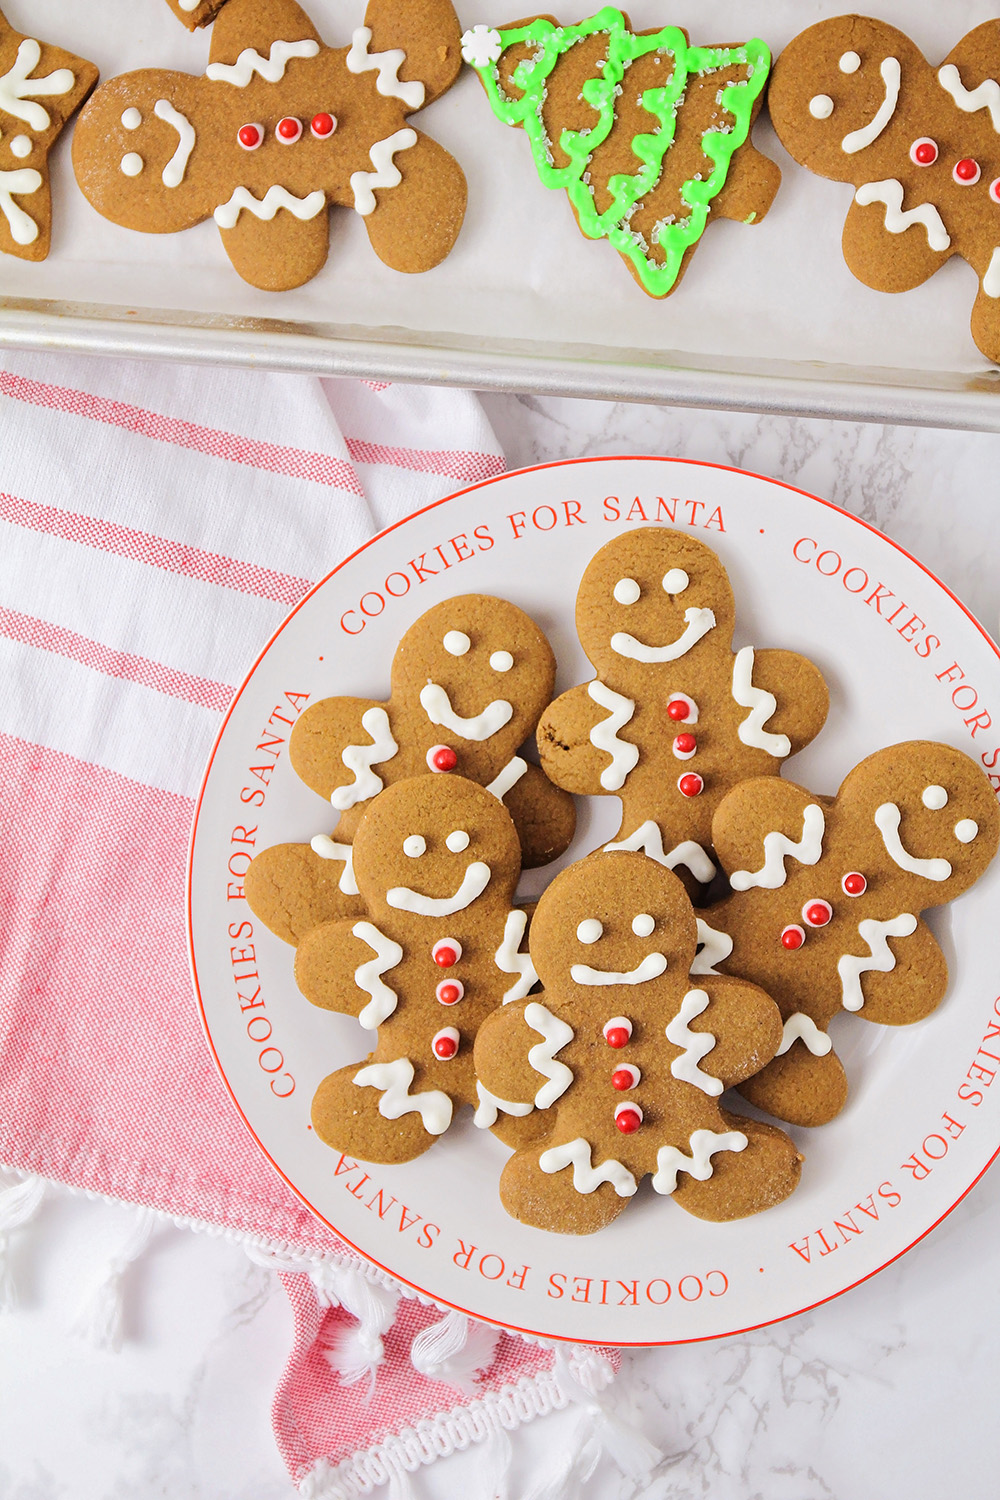 These soft and thick gingerbread cookies have the perfect lightly spiced gingerbread flavor, and are so delicious!